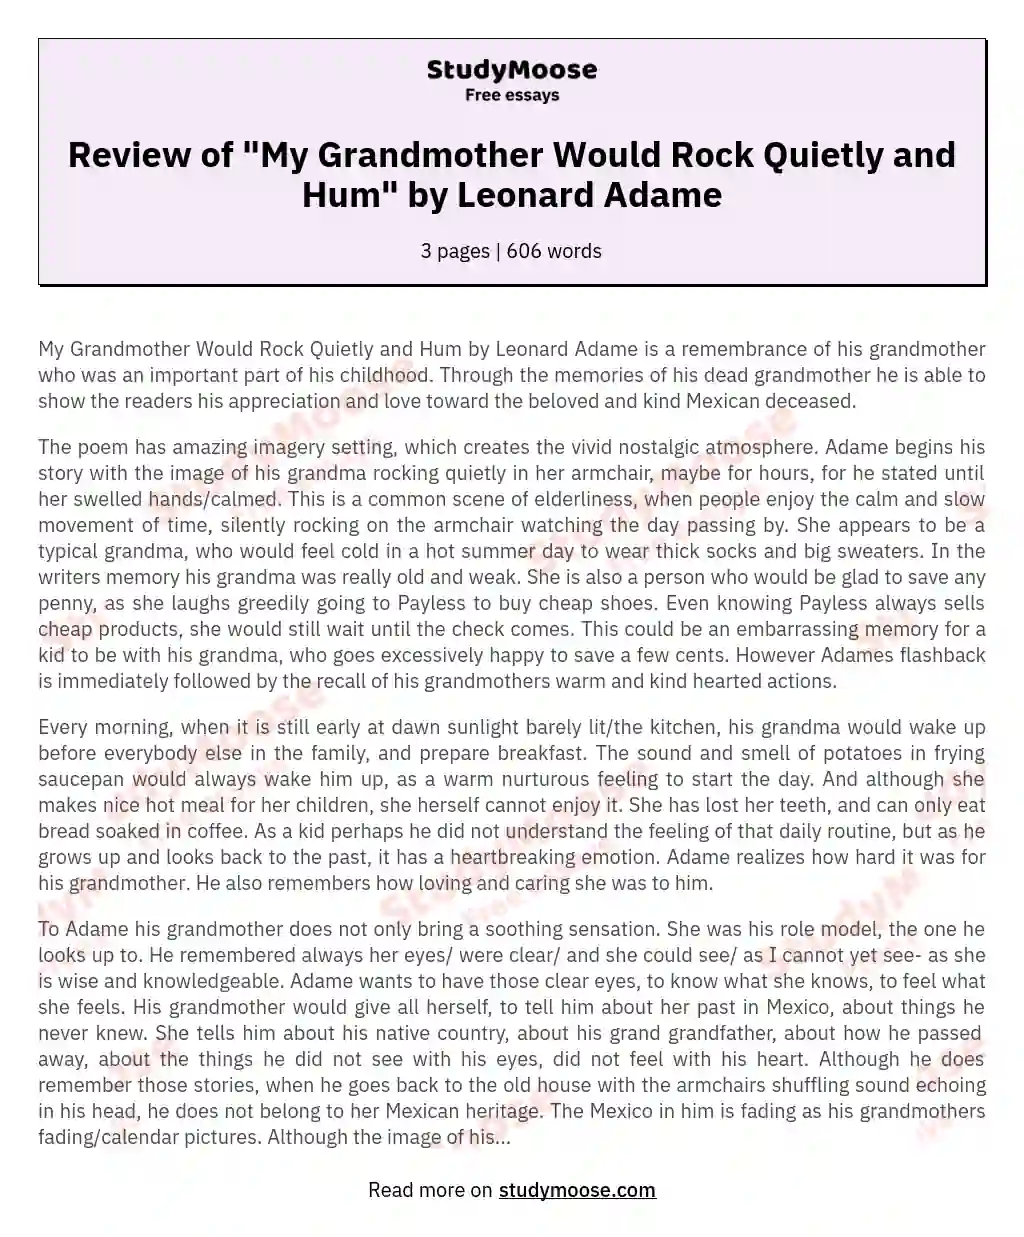 Review of "My Grandmother Would Rock Quietly and Hum" by Leonard Adame essay